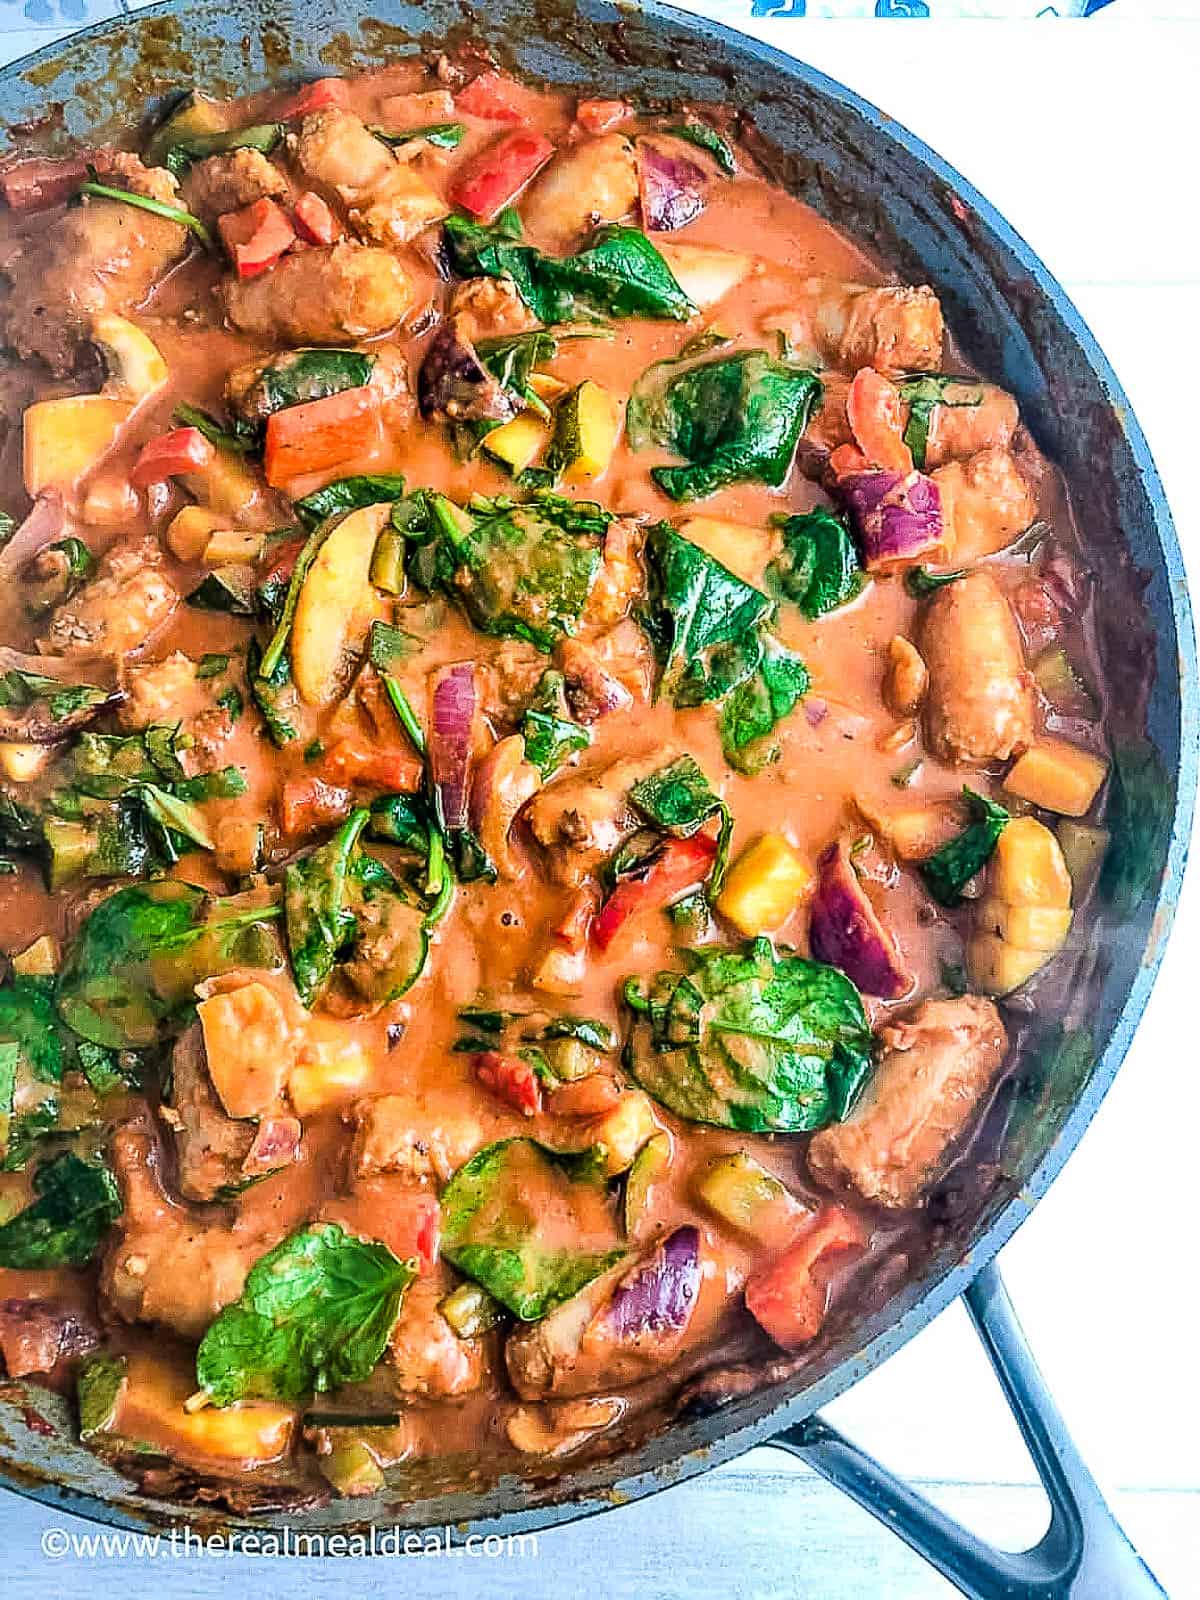 sausages and vegetables in creamy tomato sauce with spinach in pan.